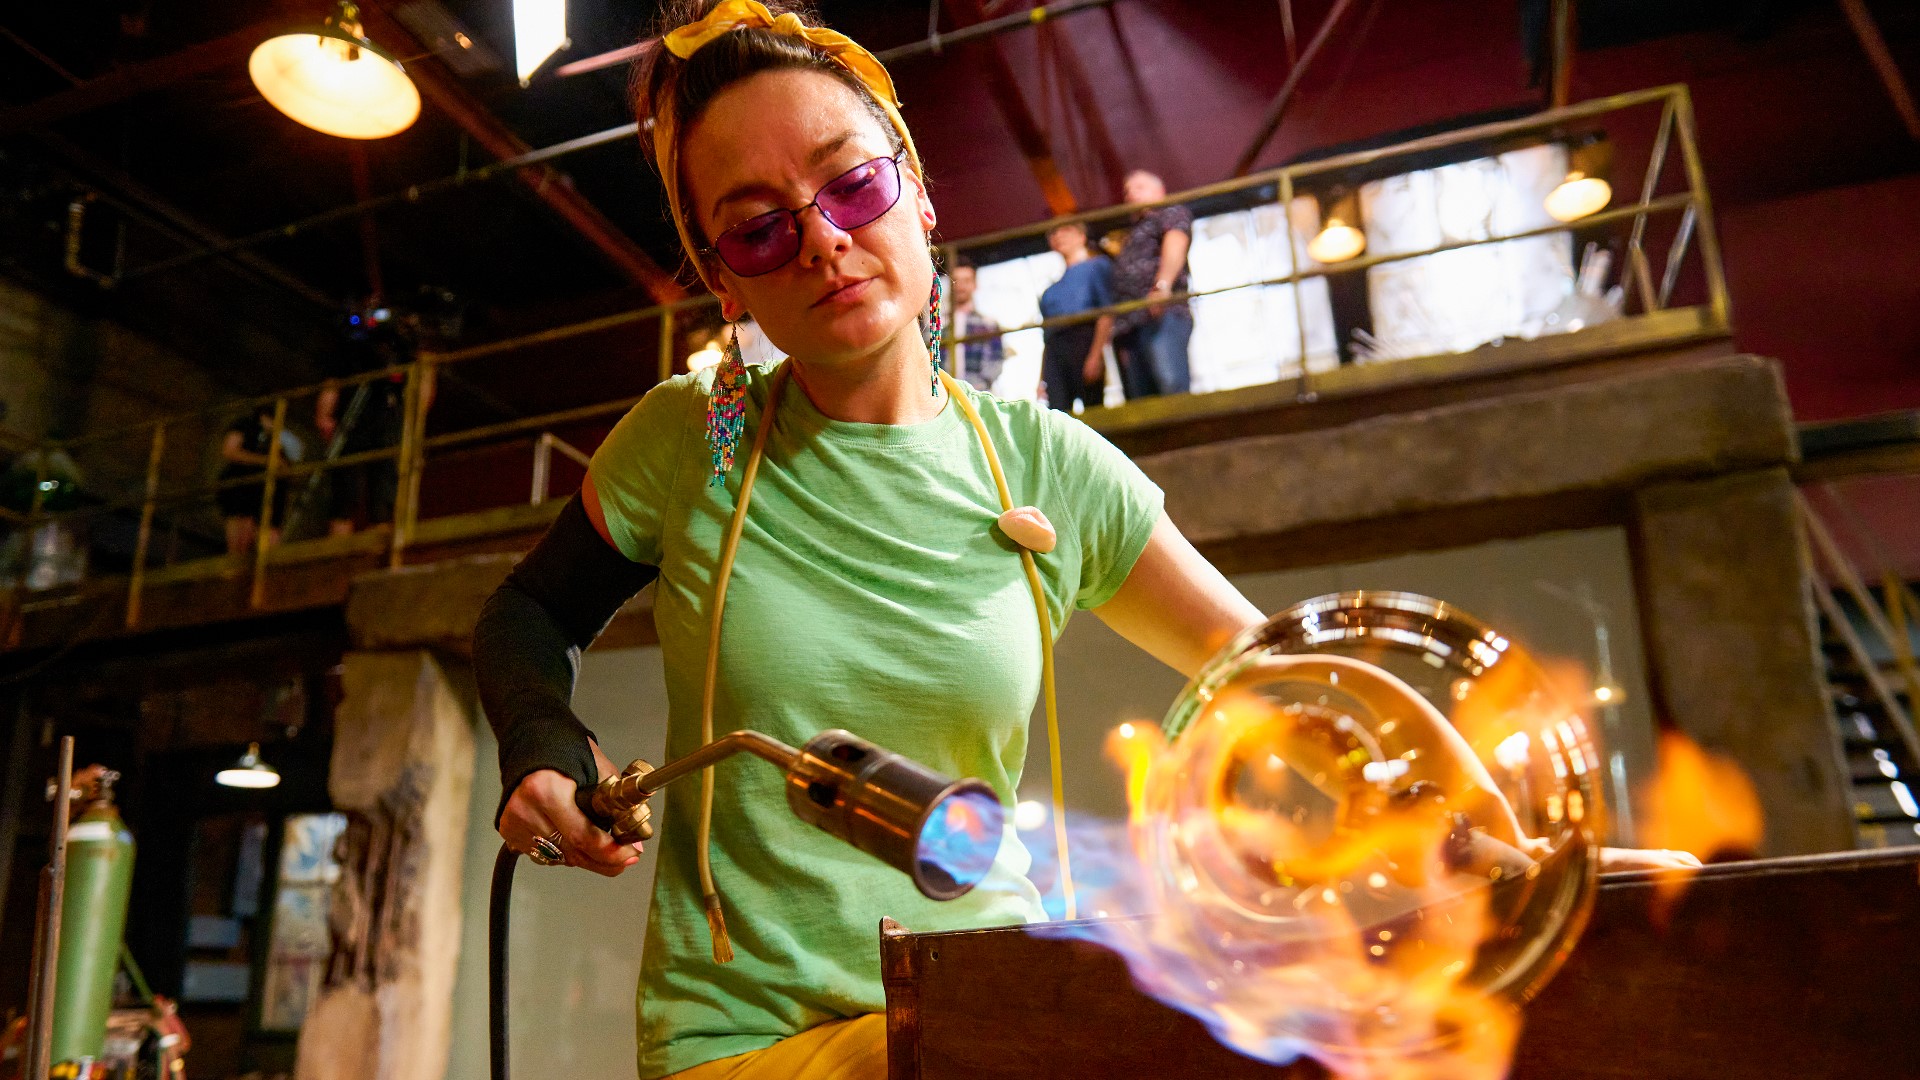 Inspired by her husband's 'last gift,' a Seattle artist takes glassblowing to a worldwide audience.